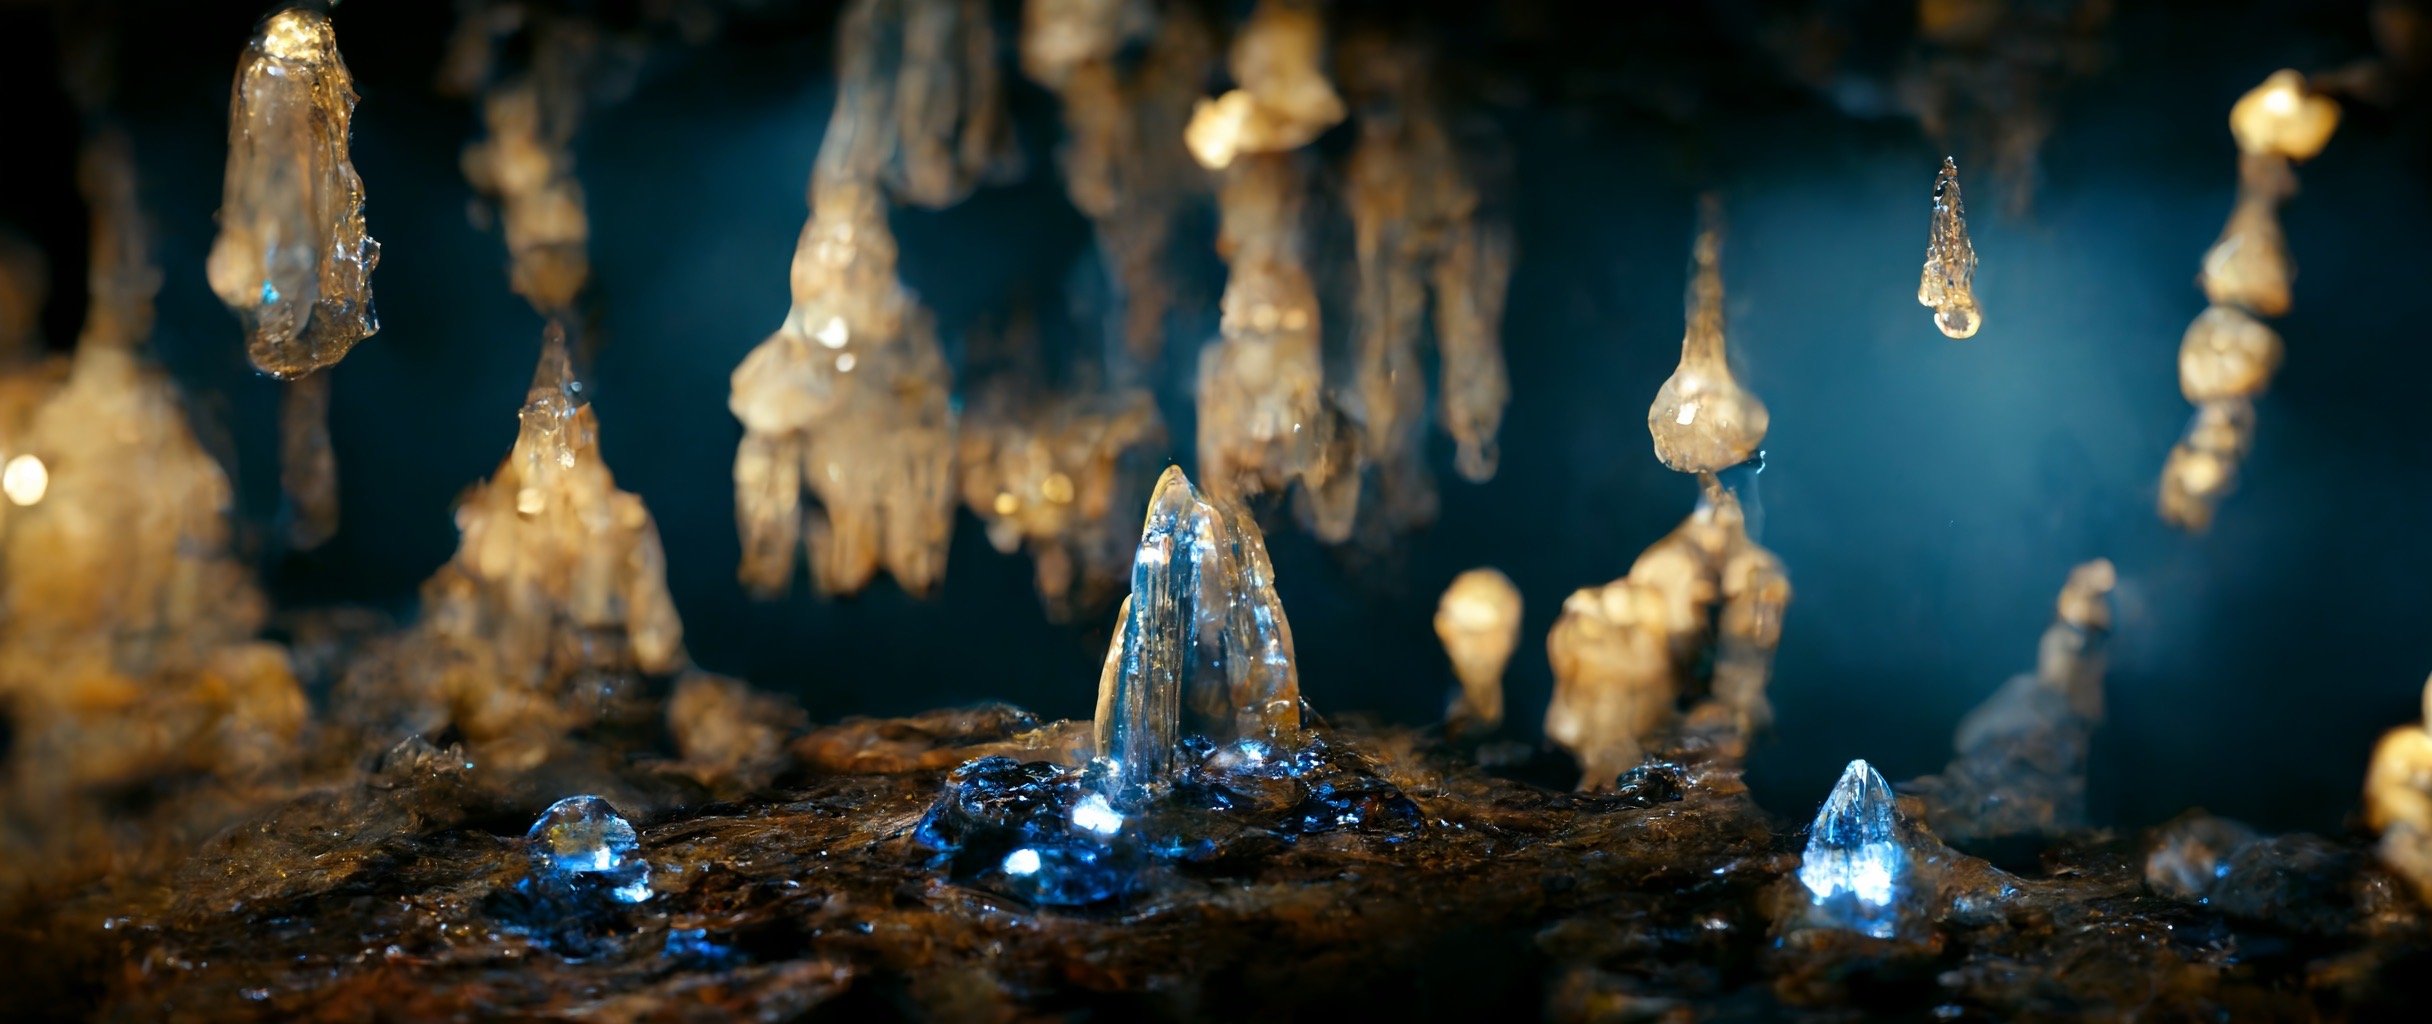 013be34c-e29e-4eed-8471-f48a6b0c2aa3_S3RAPH_httpss.mj.rungjUXDV__incredible_mystical_cave_filled_with_sapphires._Stalactites_and_stalagmites_dri.JPG